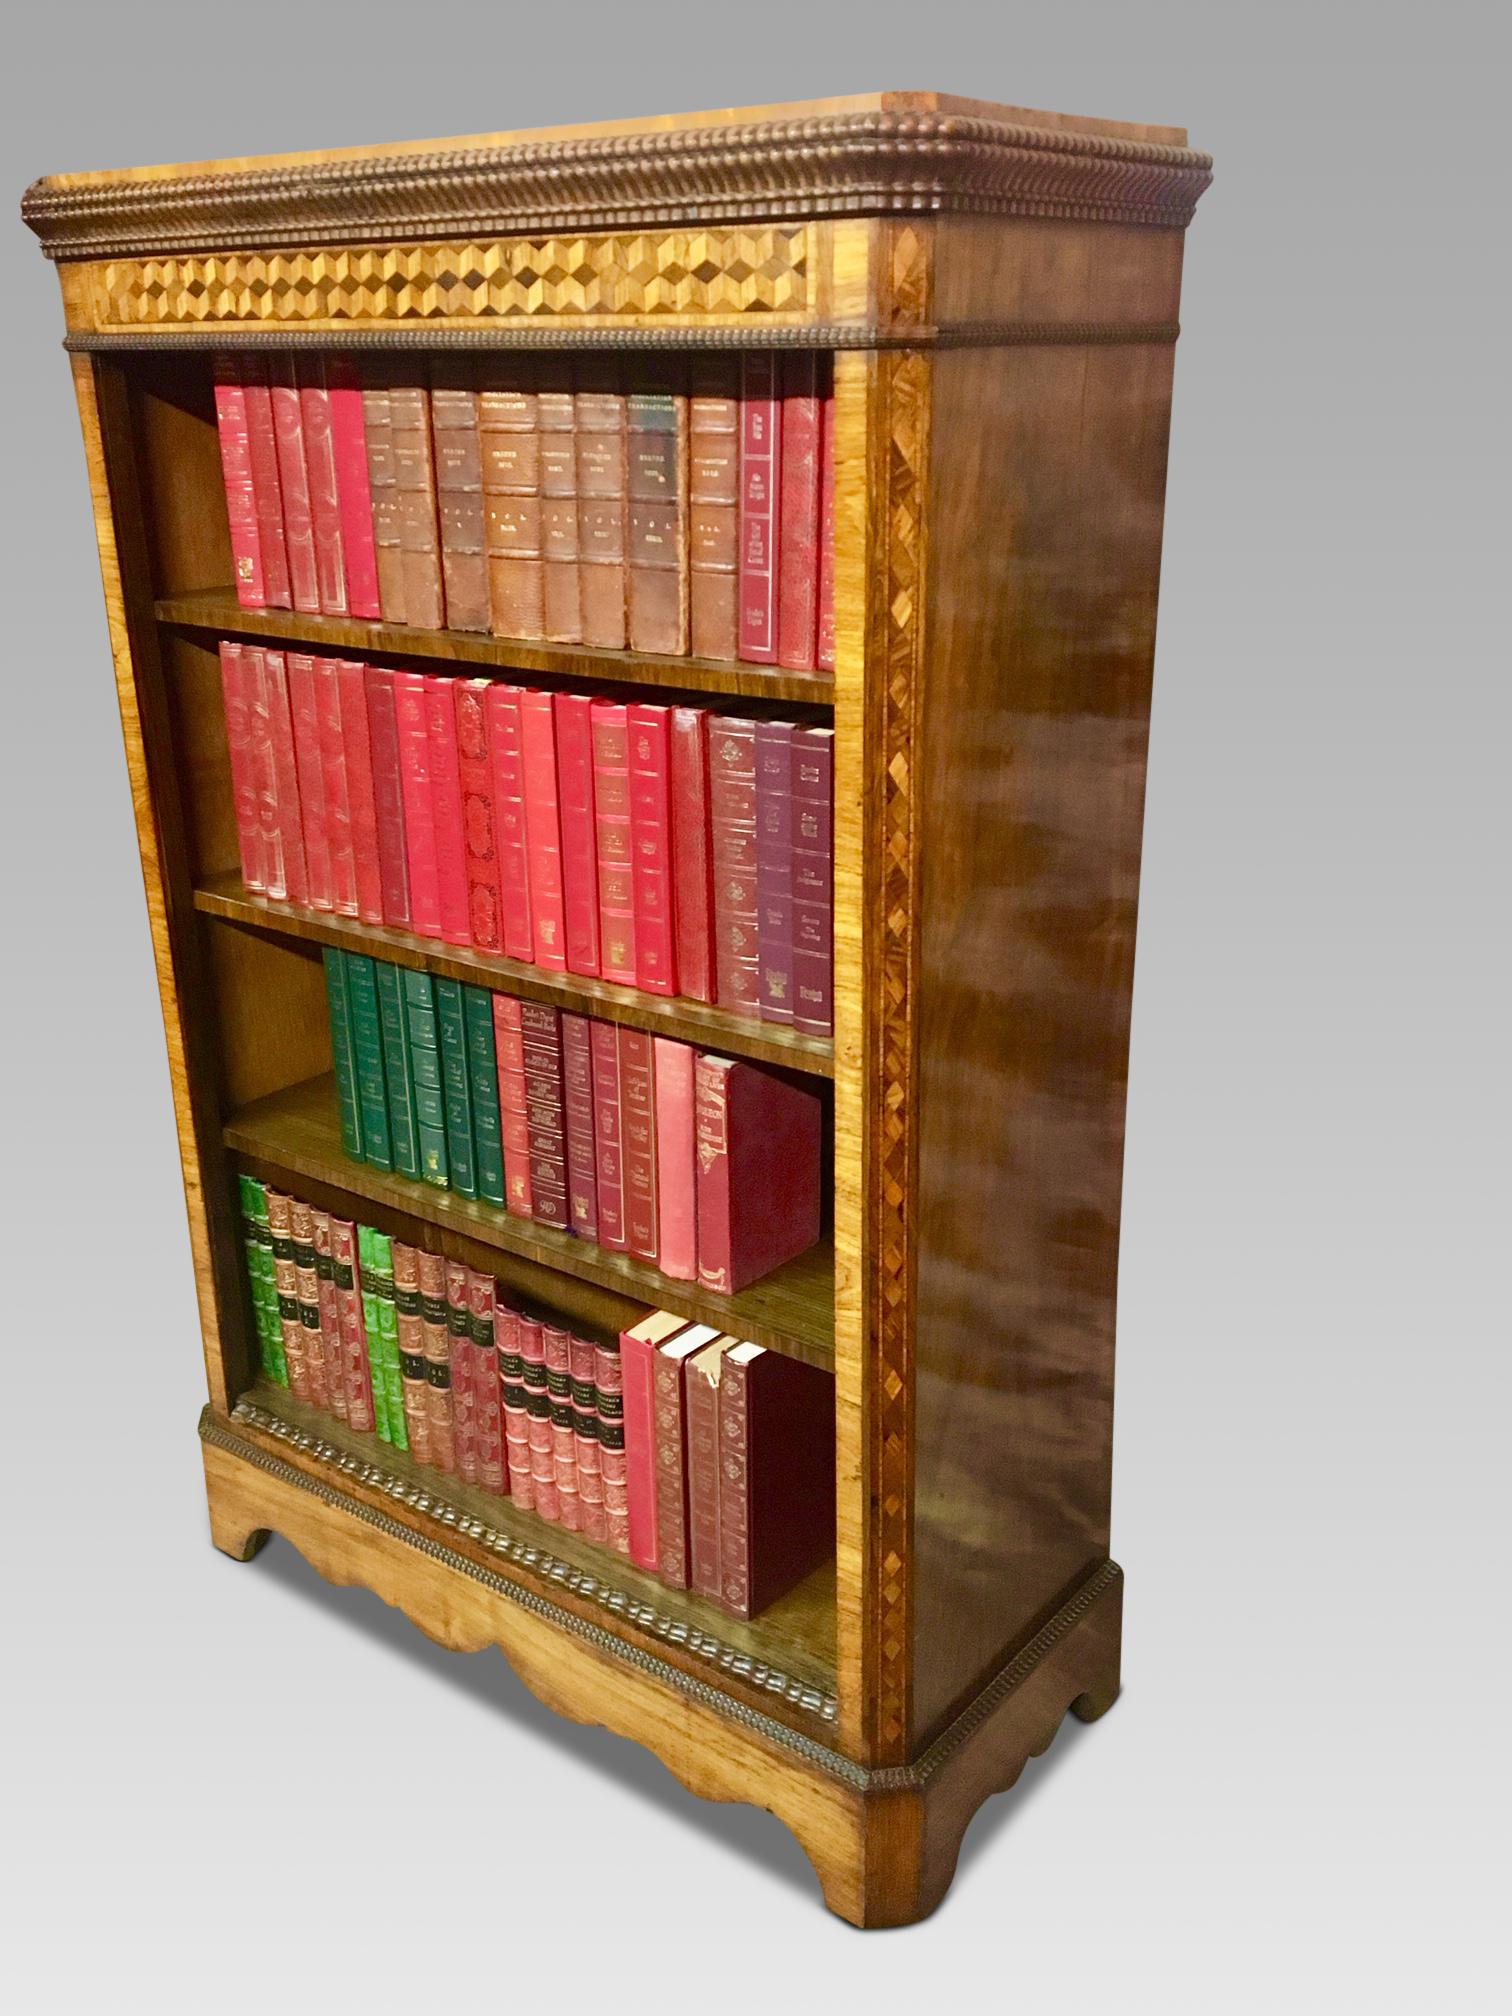 Good quality rosewood and marquetry open bookcase, circa 1880.
This is an attractive and compact solid bookcase, with 4 shelves, 3 adjustable
and giving a maximum shelf depth of 10.5 ins.
The original mellow finish and patina are a delight, and